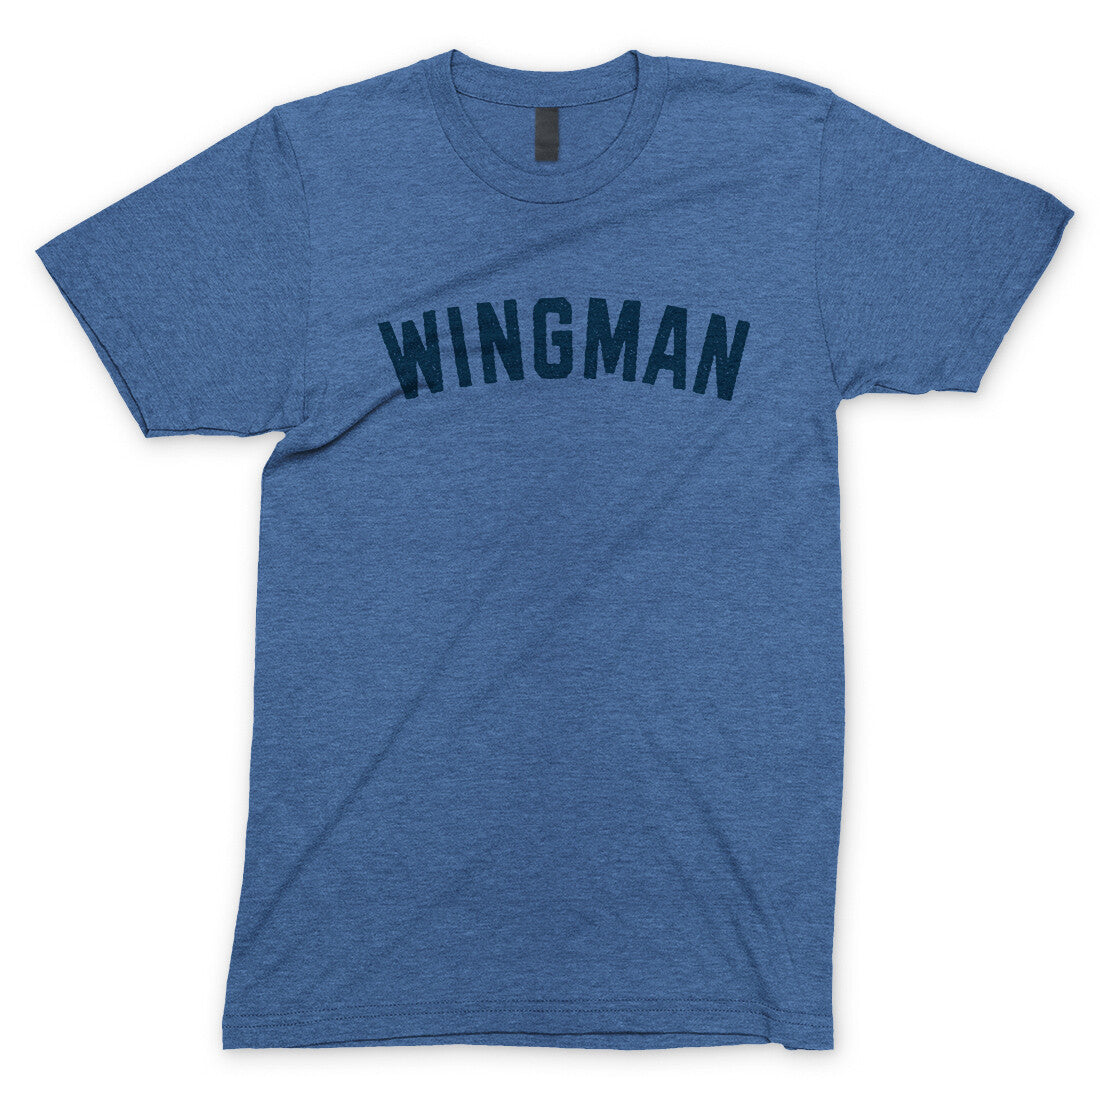 Wingman in Heather Royal Color